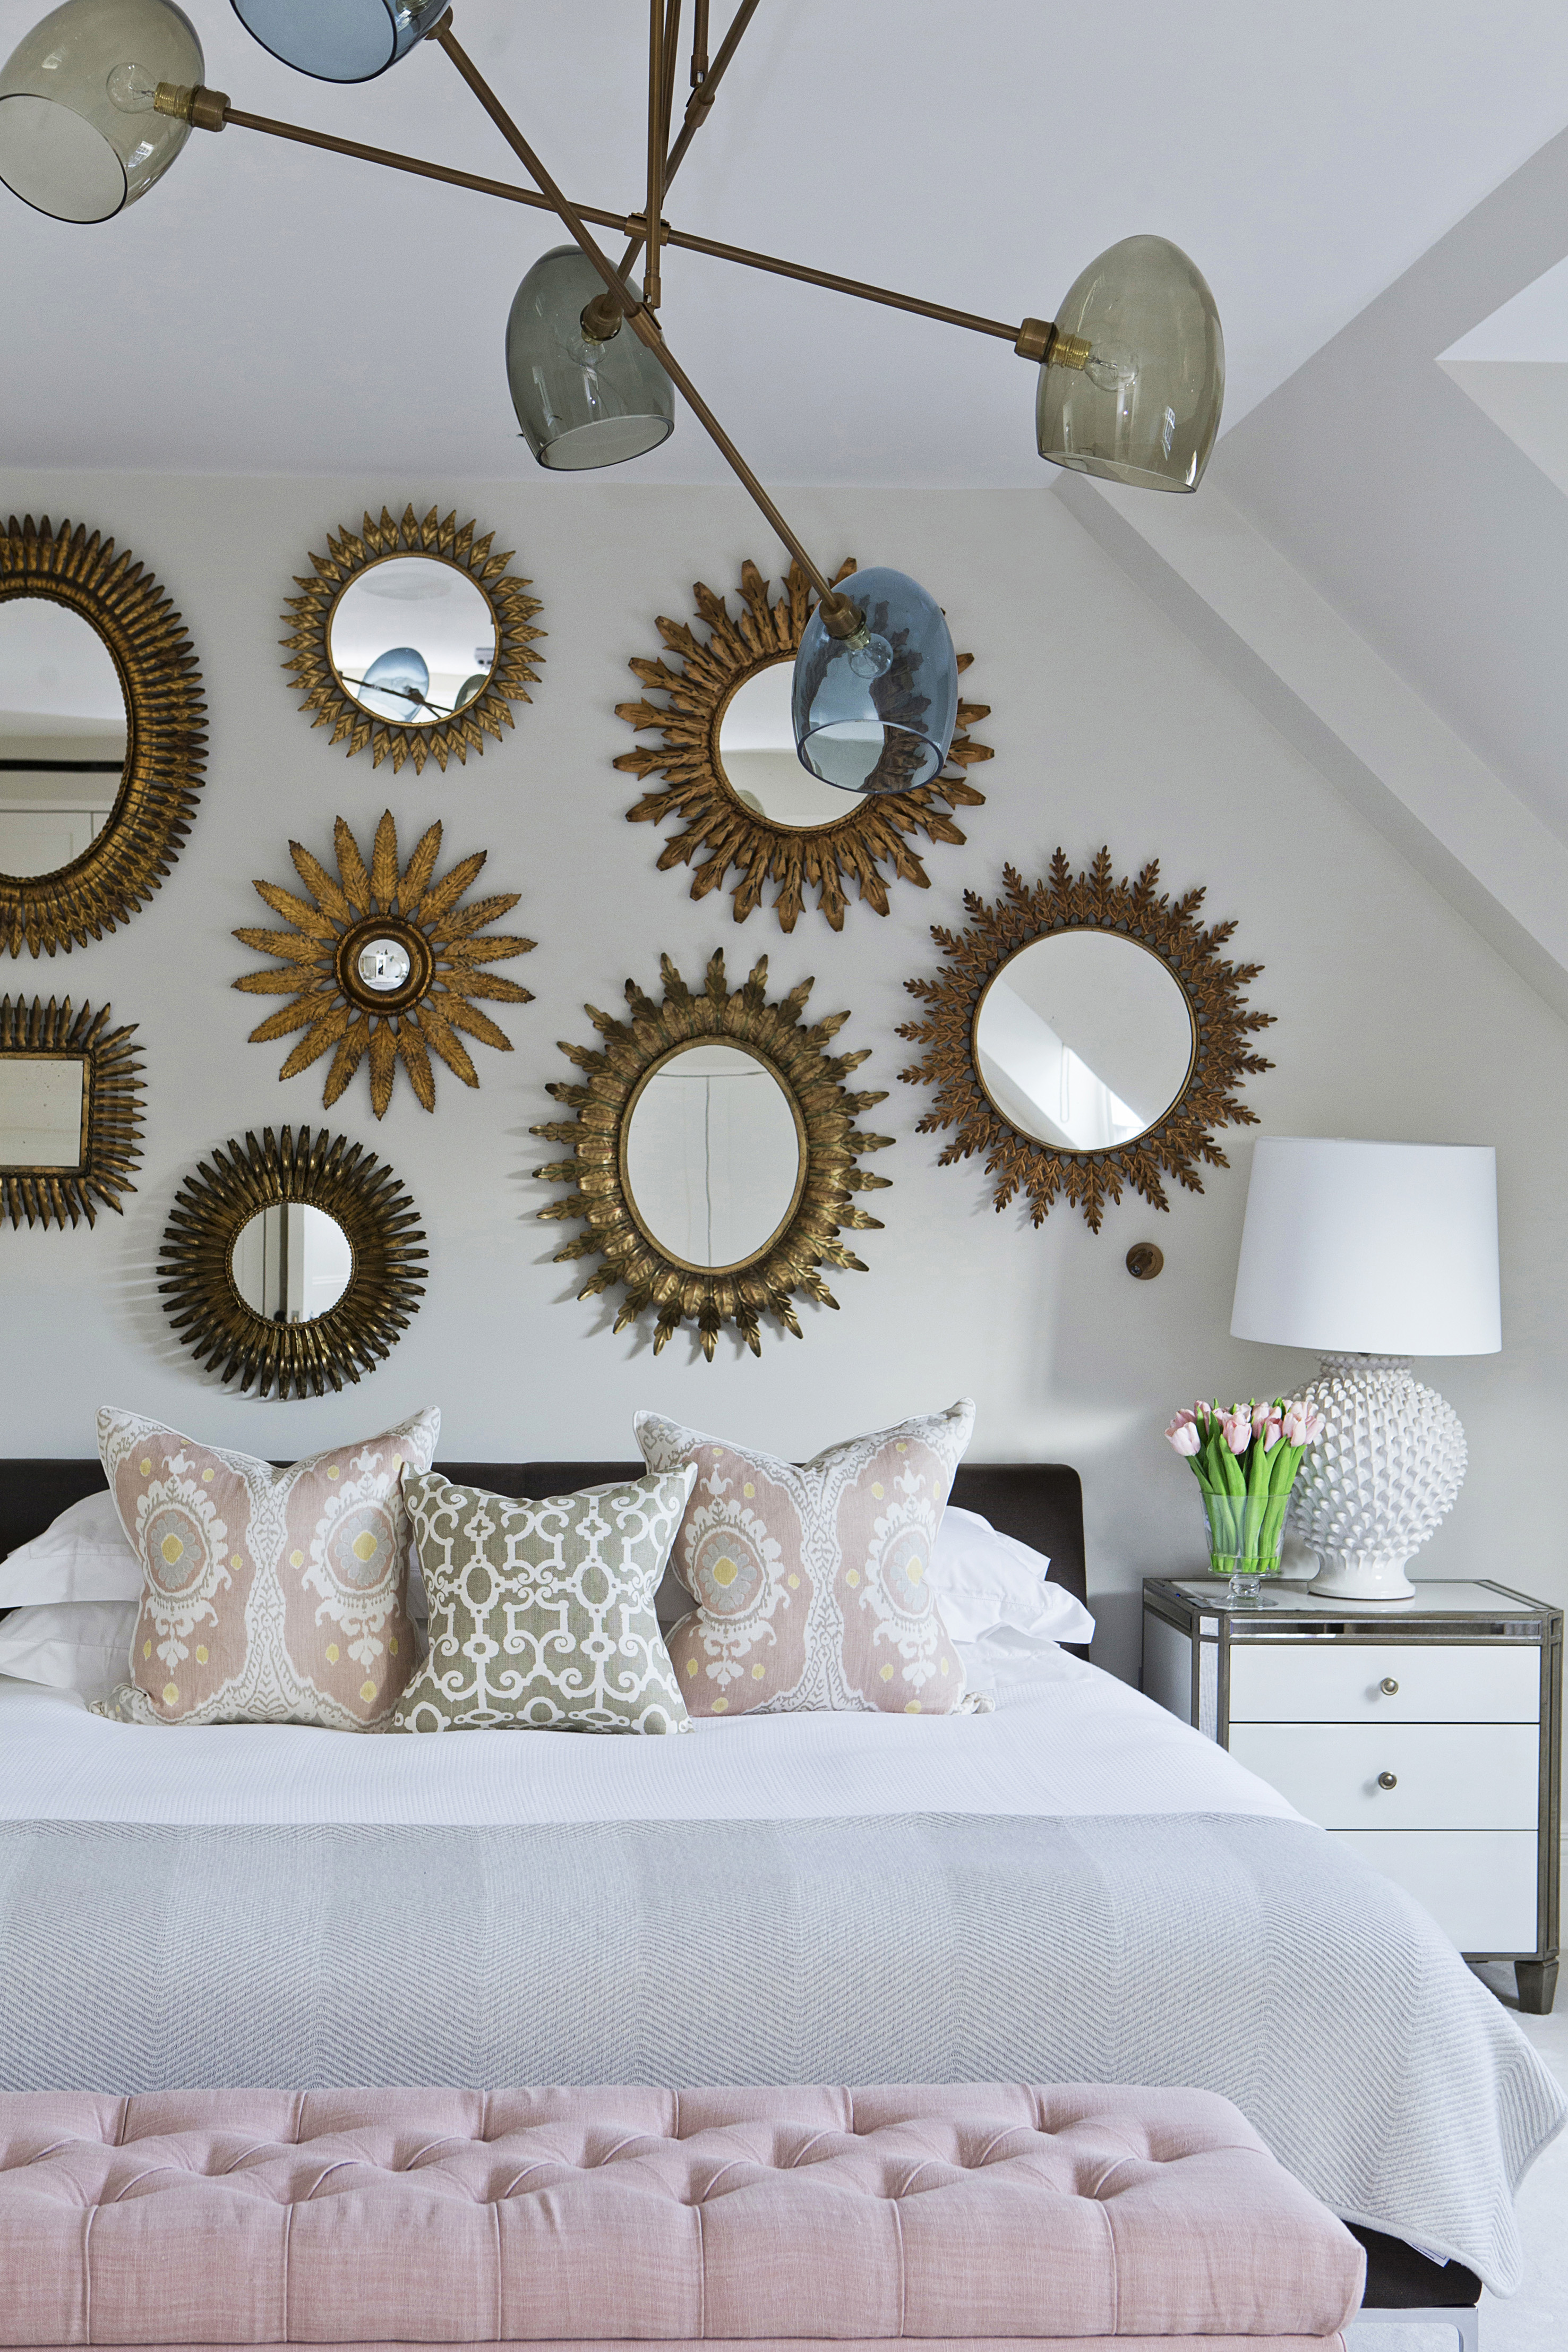 Bedroom with gallery wall of mirrors